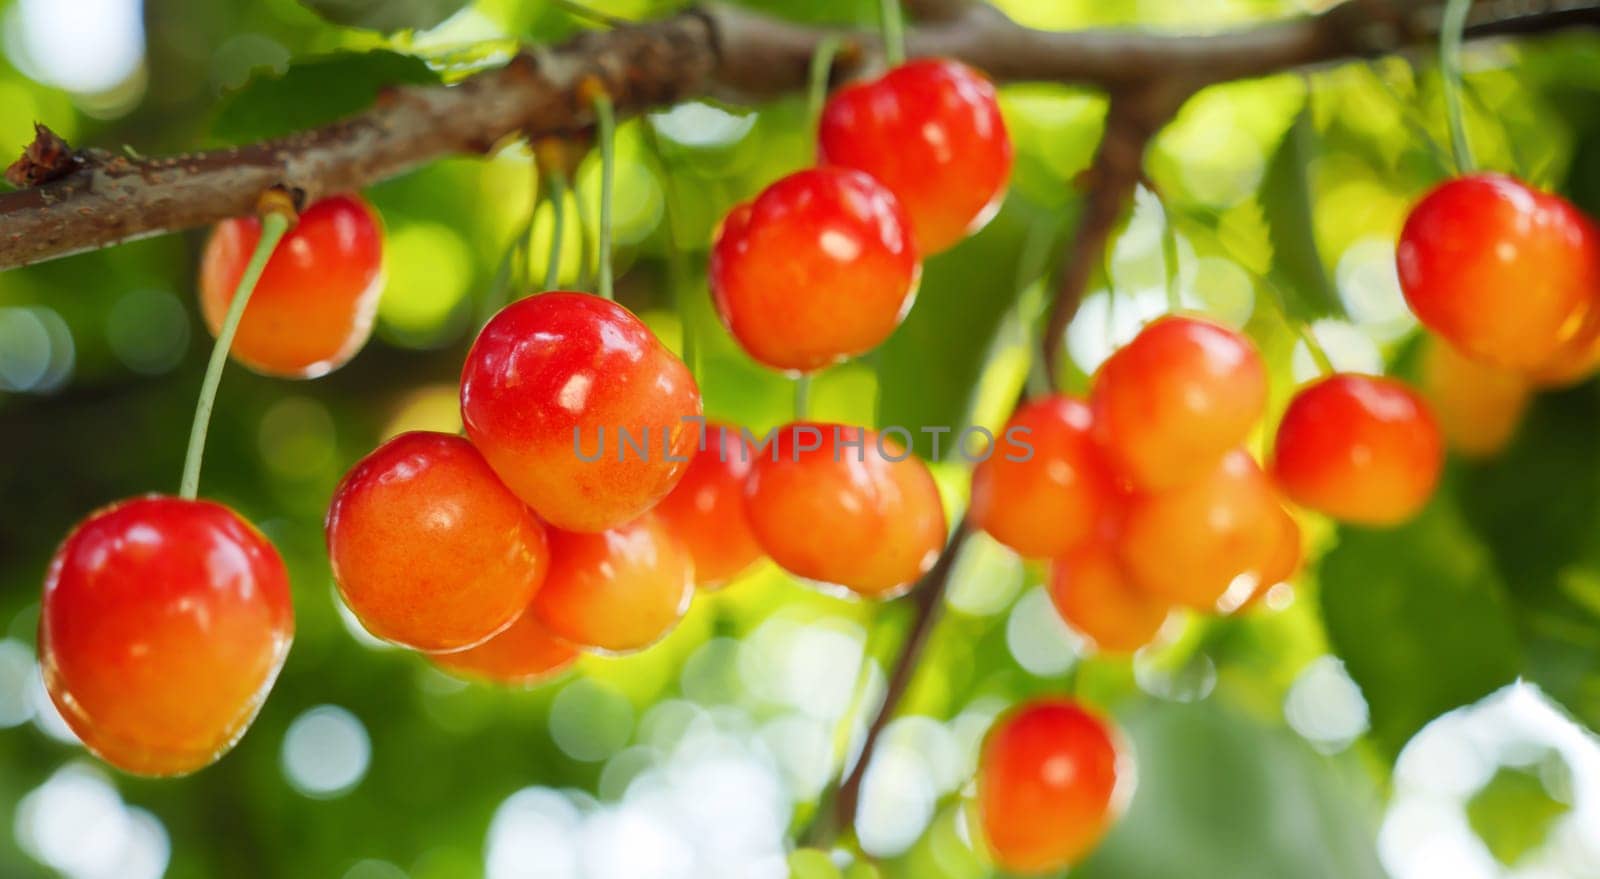 Rainier cherry harvest garden growing fruit branch sweet cherry hanging berry tree. Ripe sweet cherry tree branch bunch cherry harvest season. Harvesting fruit tree garden fruit farm harvest concept by synel